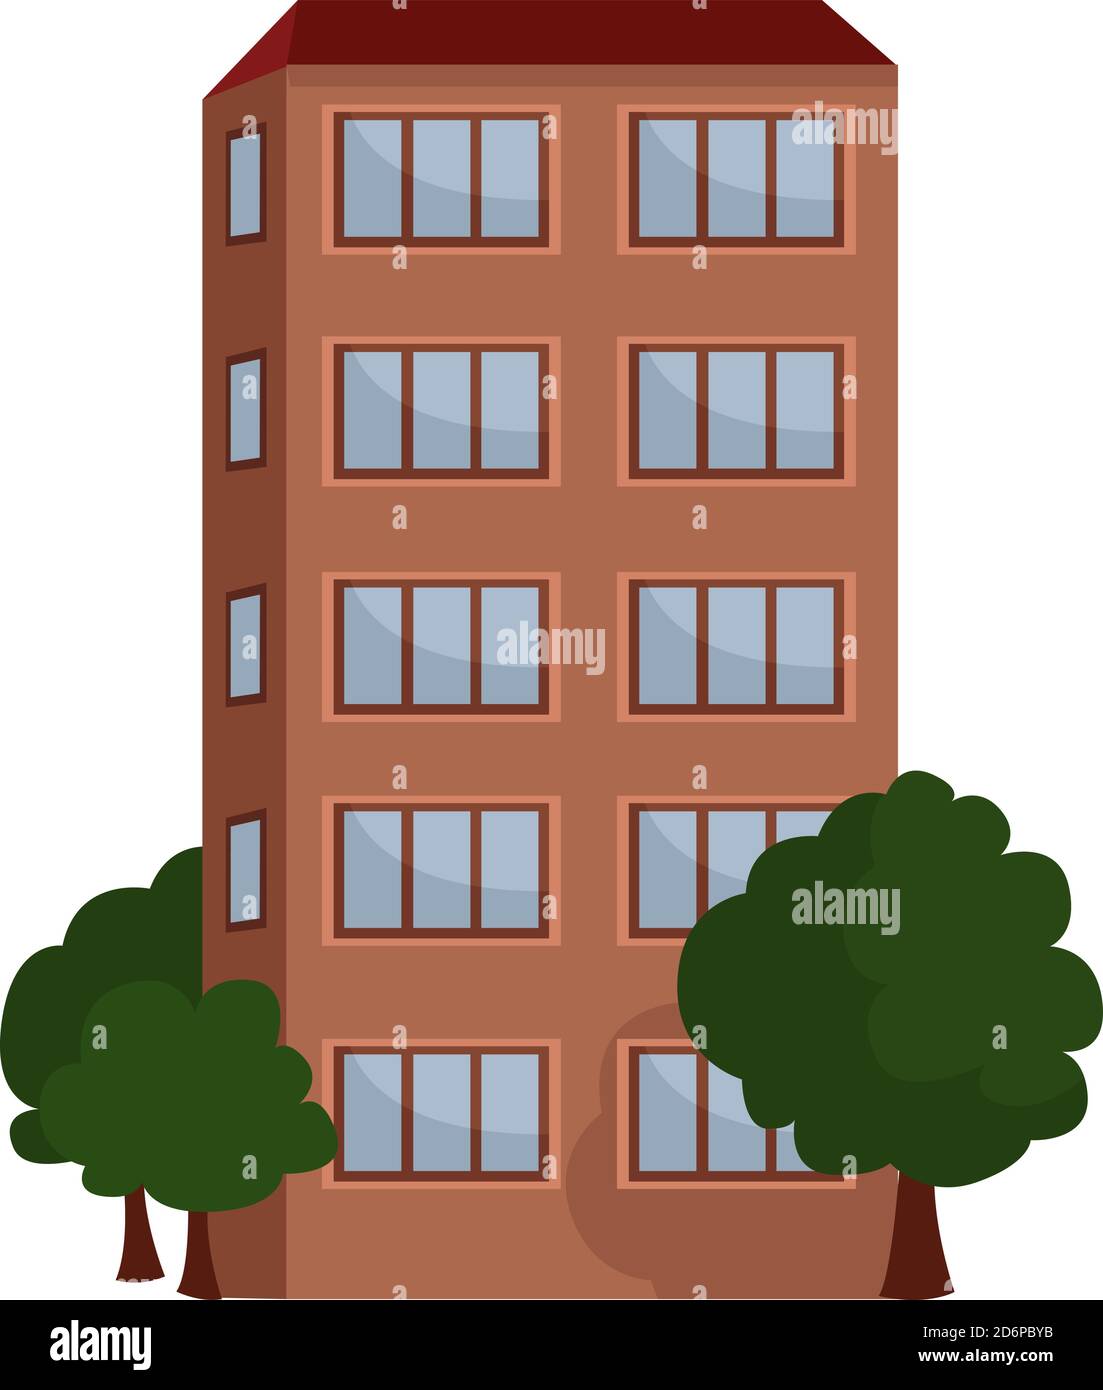 Tall building, illustration, vector on white background. Stock Vector